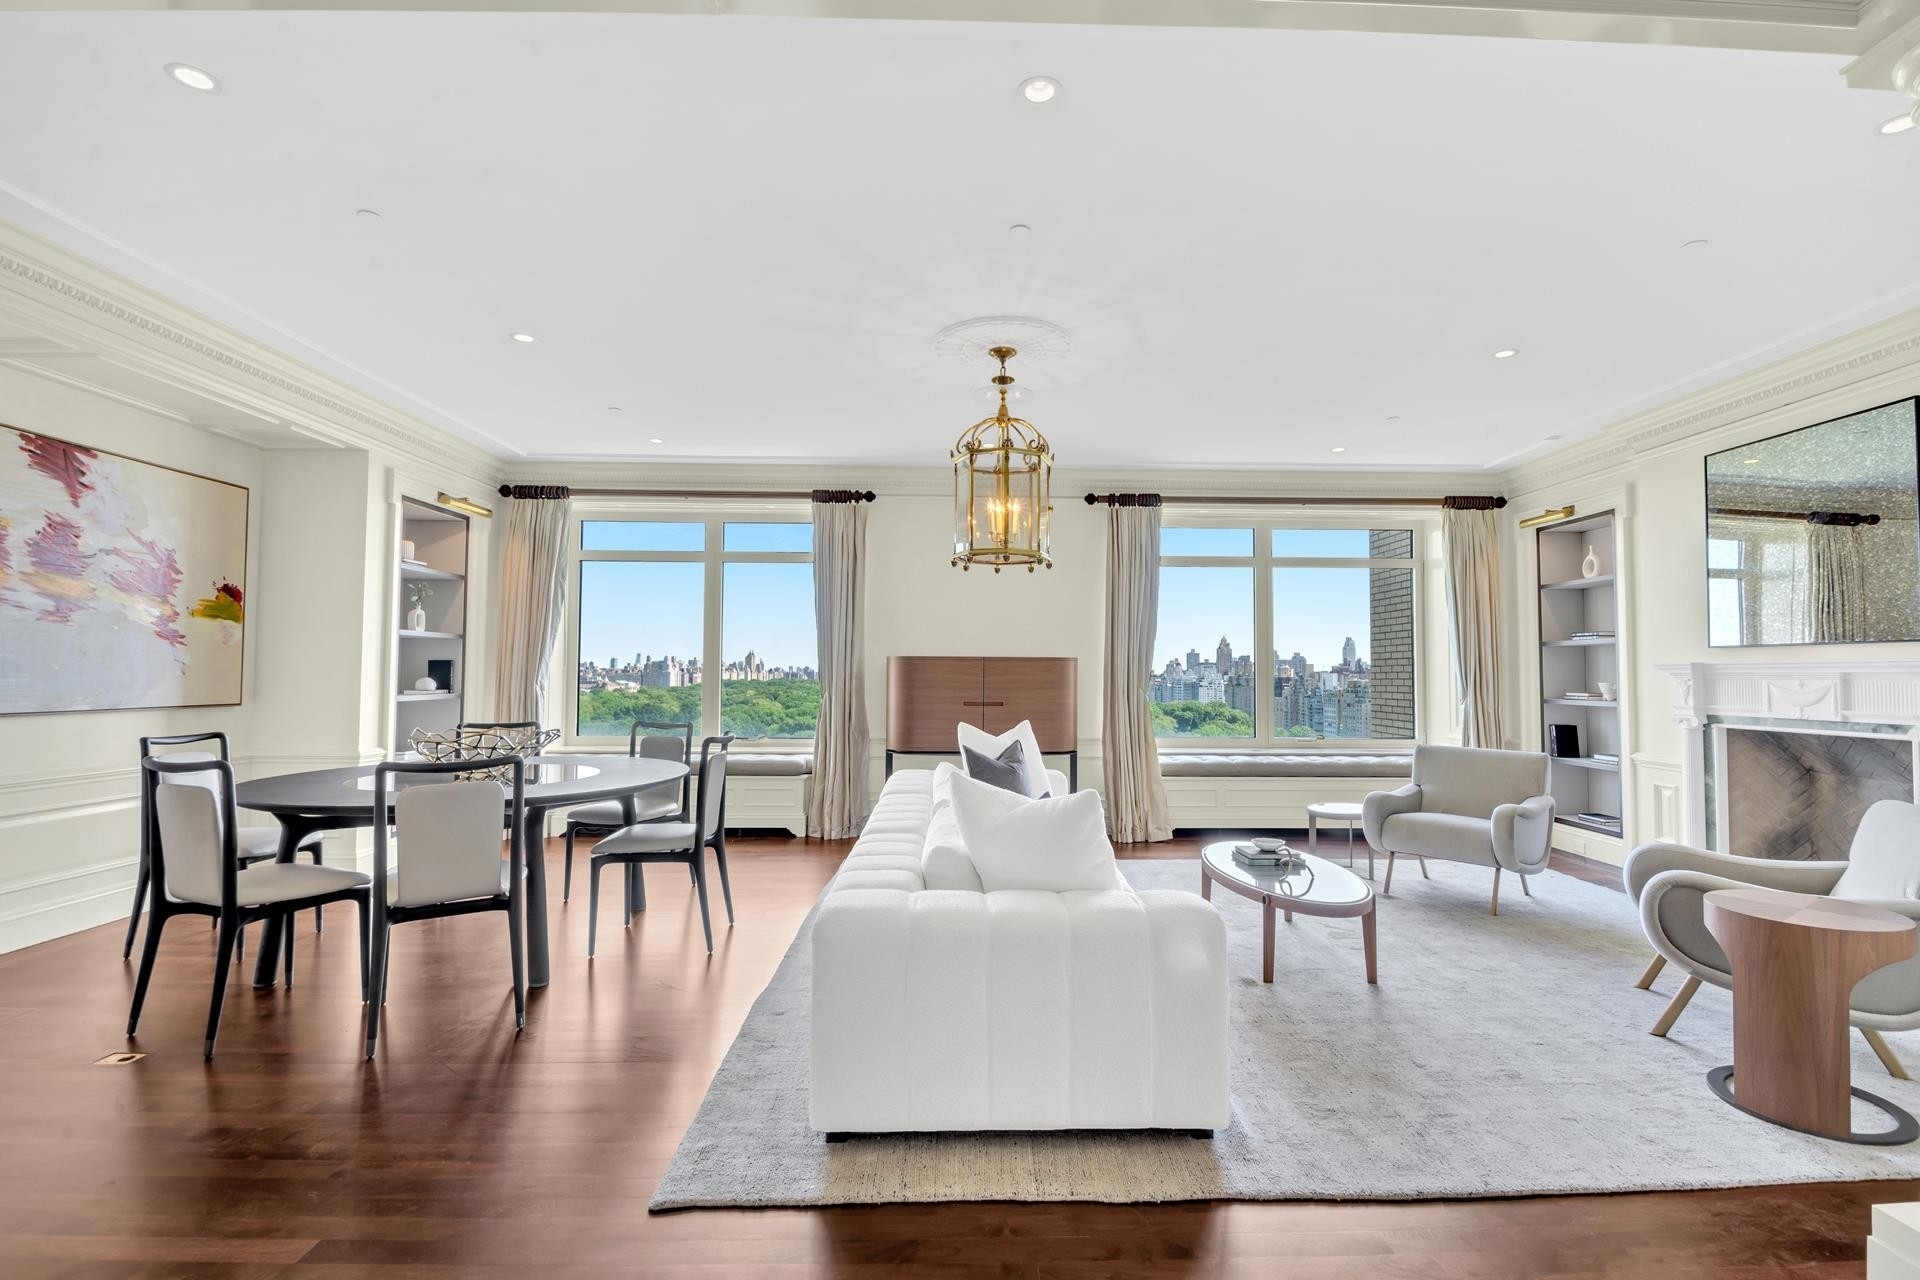 Condominium for Sale at Residences At Ritz-Carlton, 50 CENTRAL PARK S, 24B Central Park South, New York, New York 10019